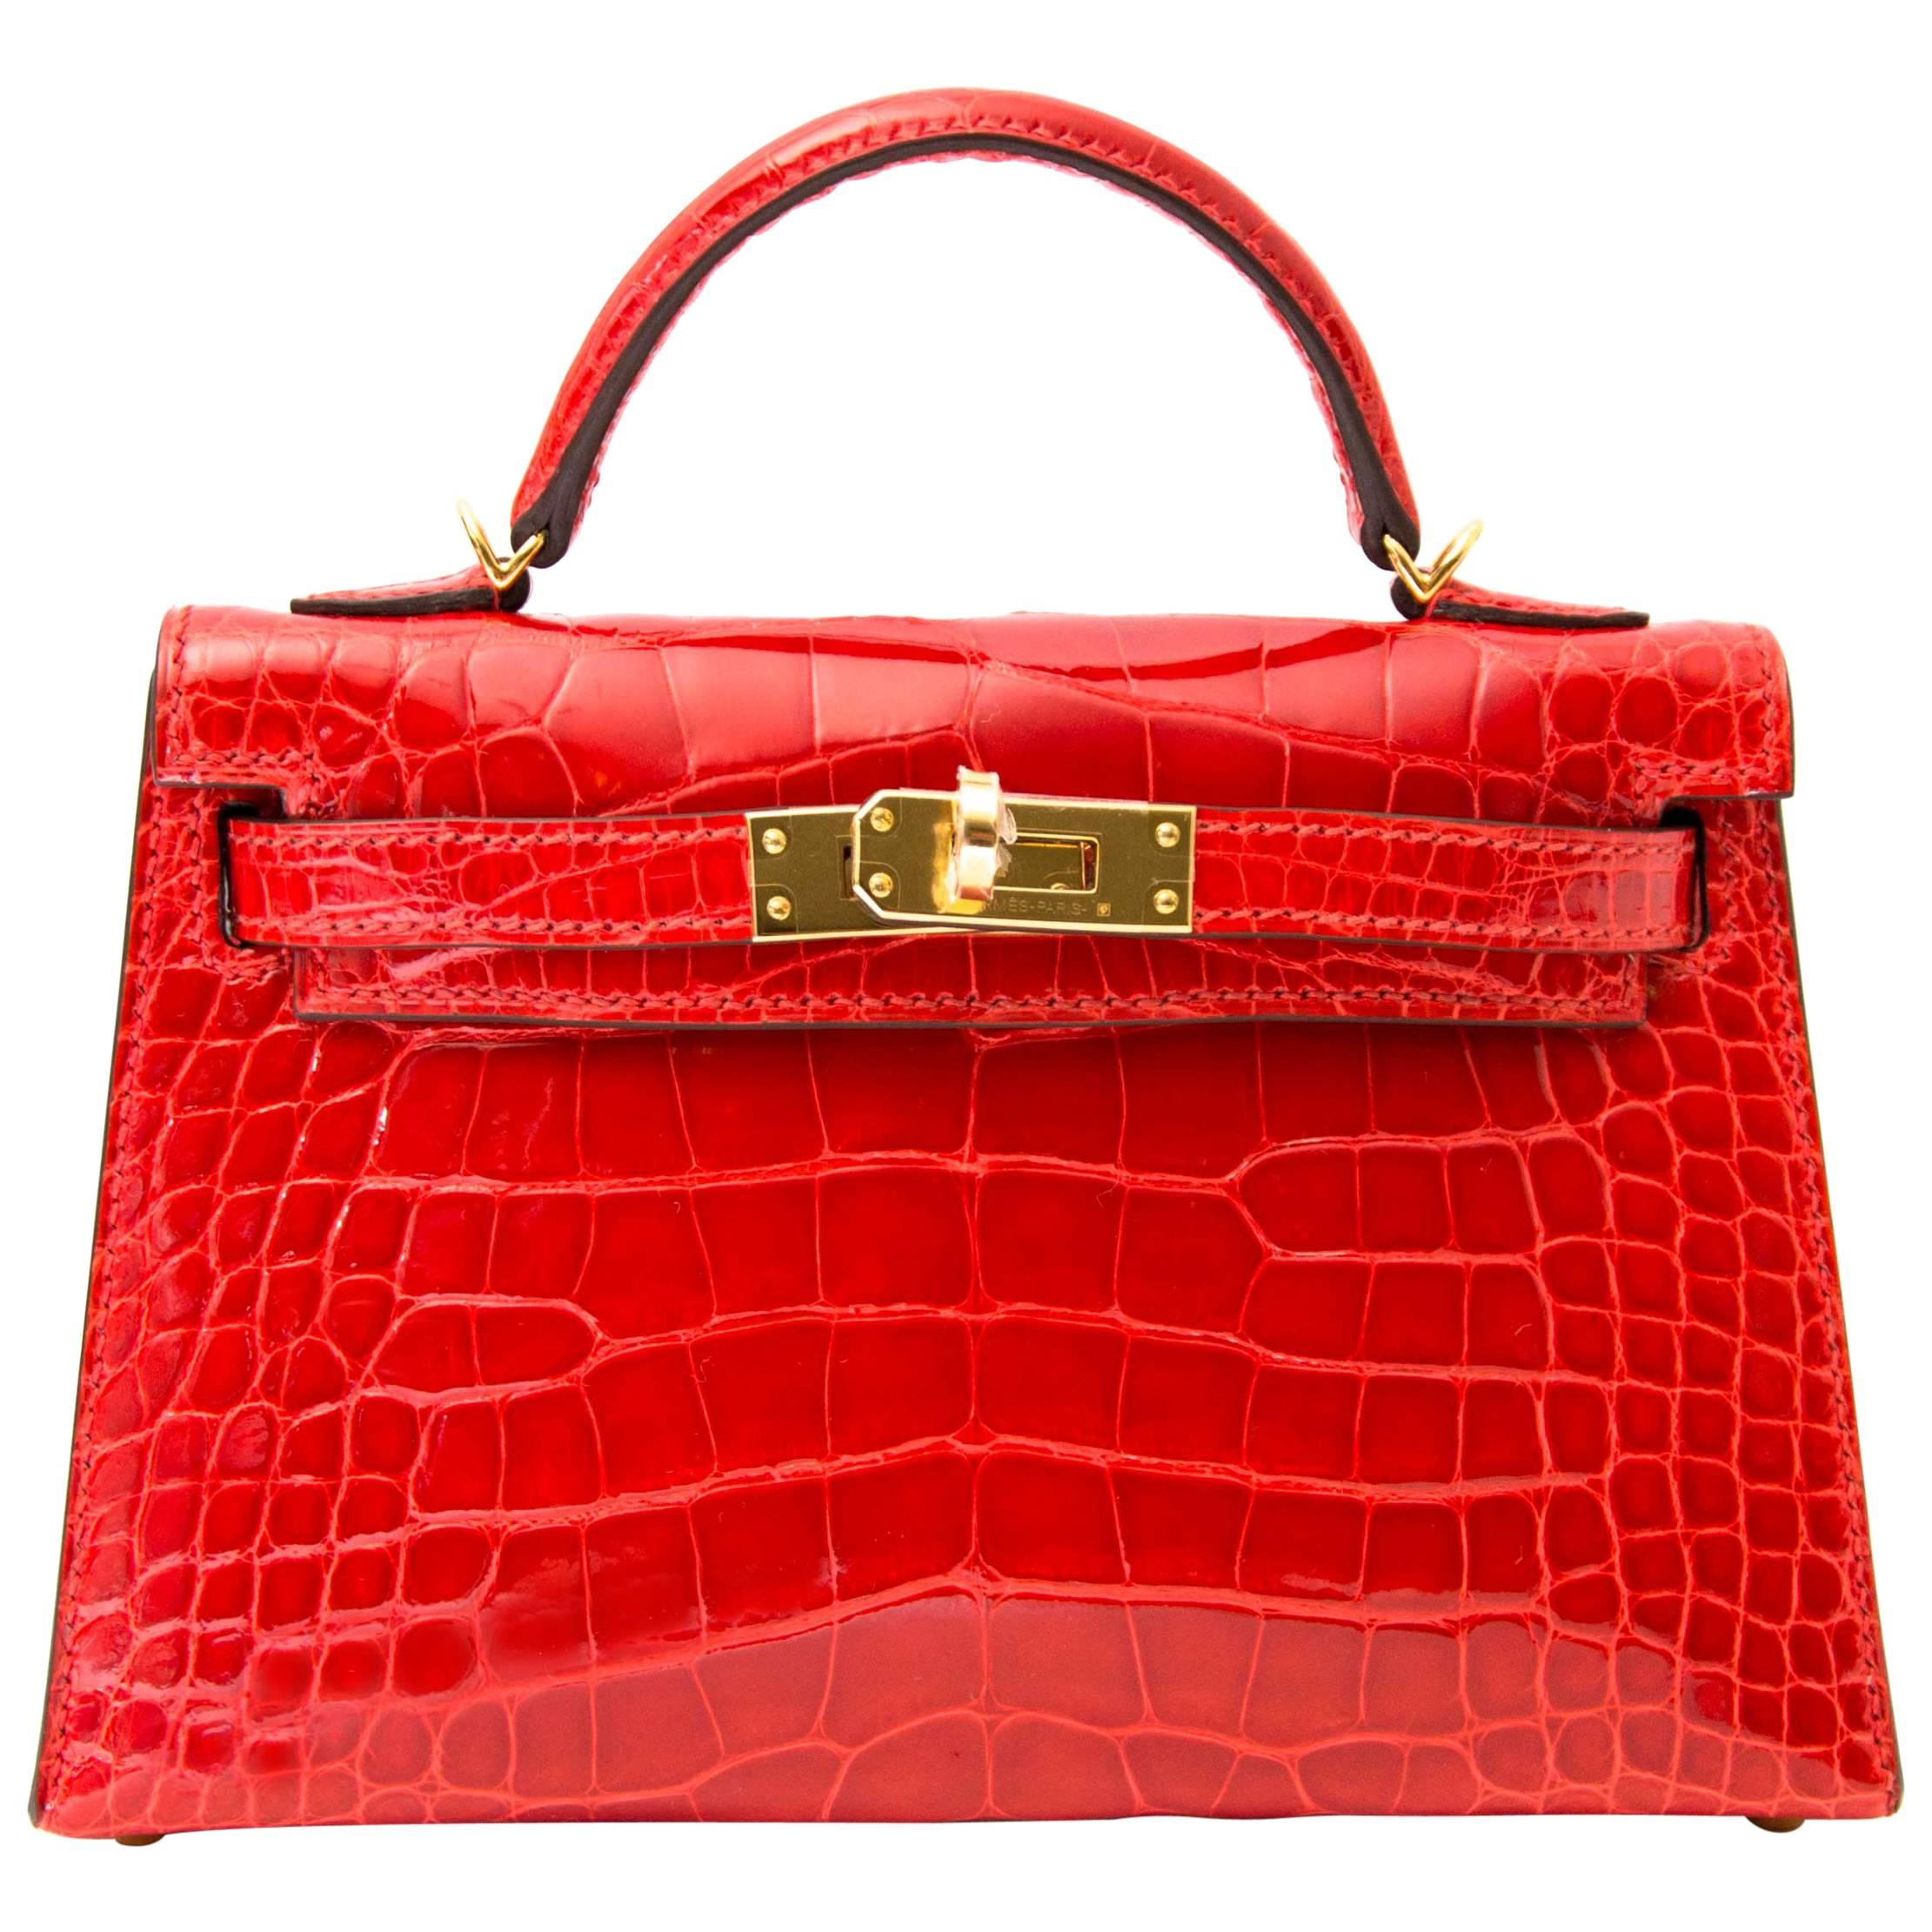 NEVER BUYING THESE HERMES BAGS!  NEW HERMES MICRO PICOTIN, KELLY  QUADRILLE, HAC PHONE CASE.. 